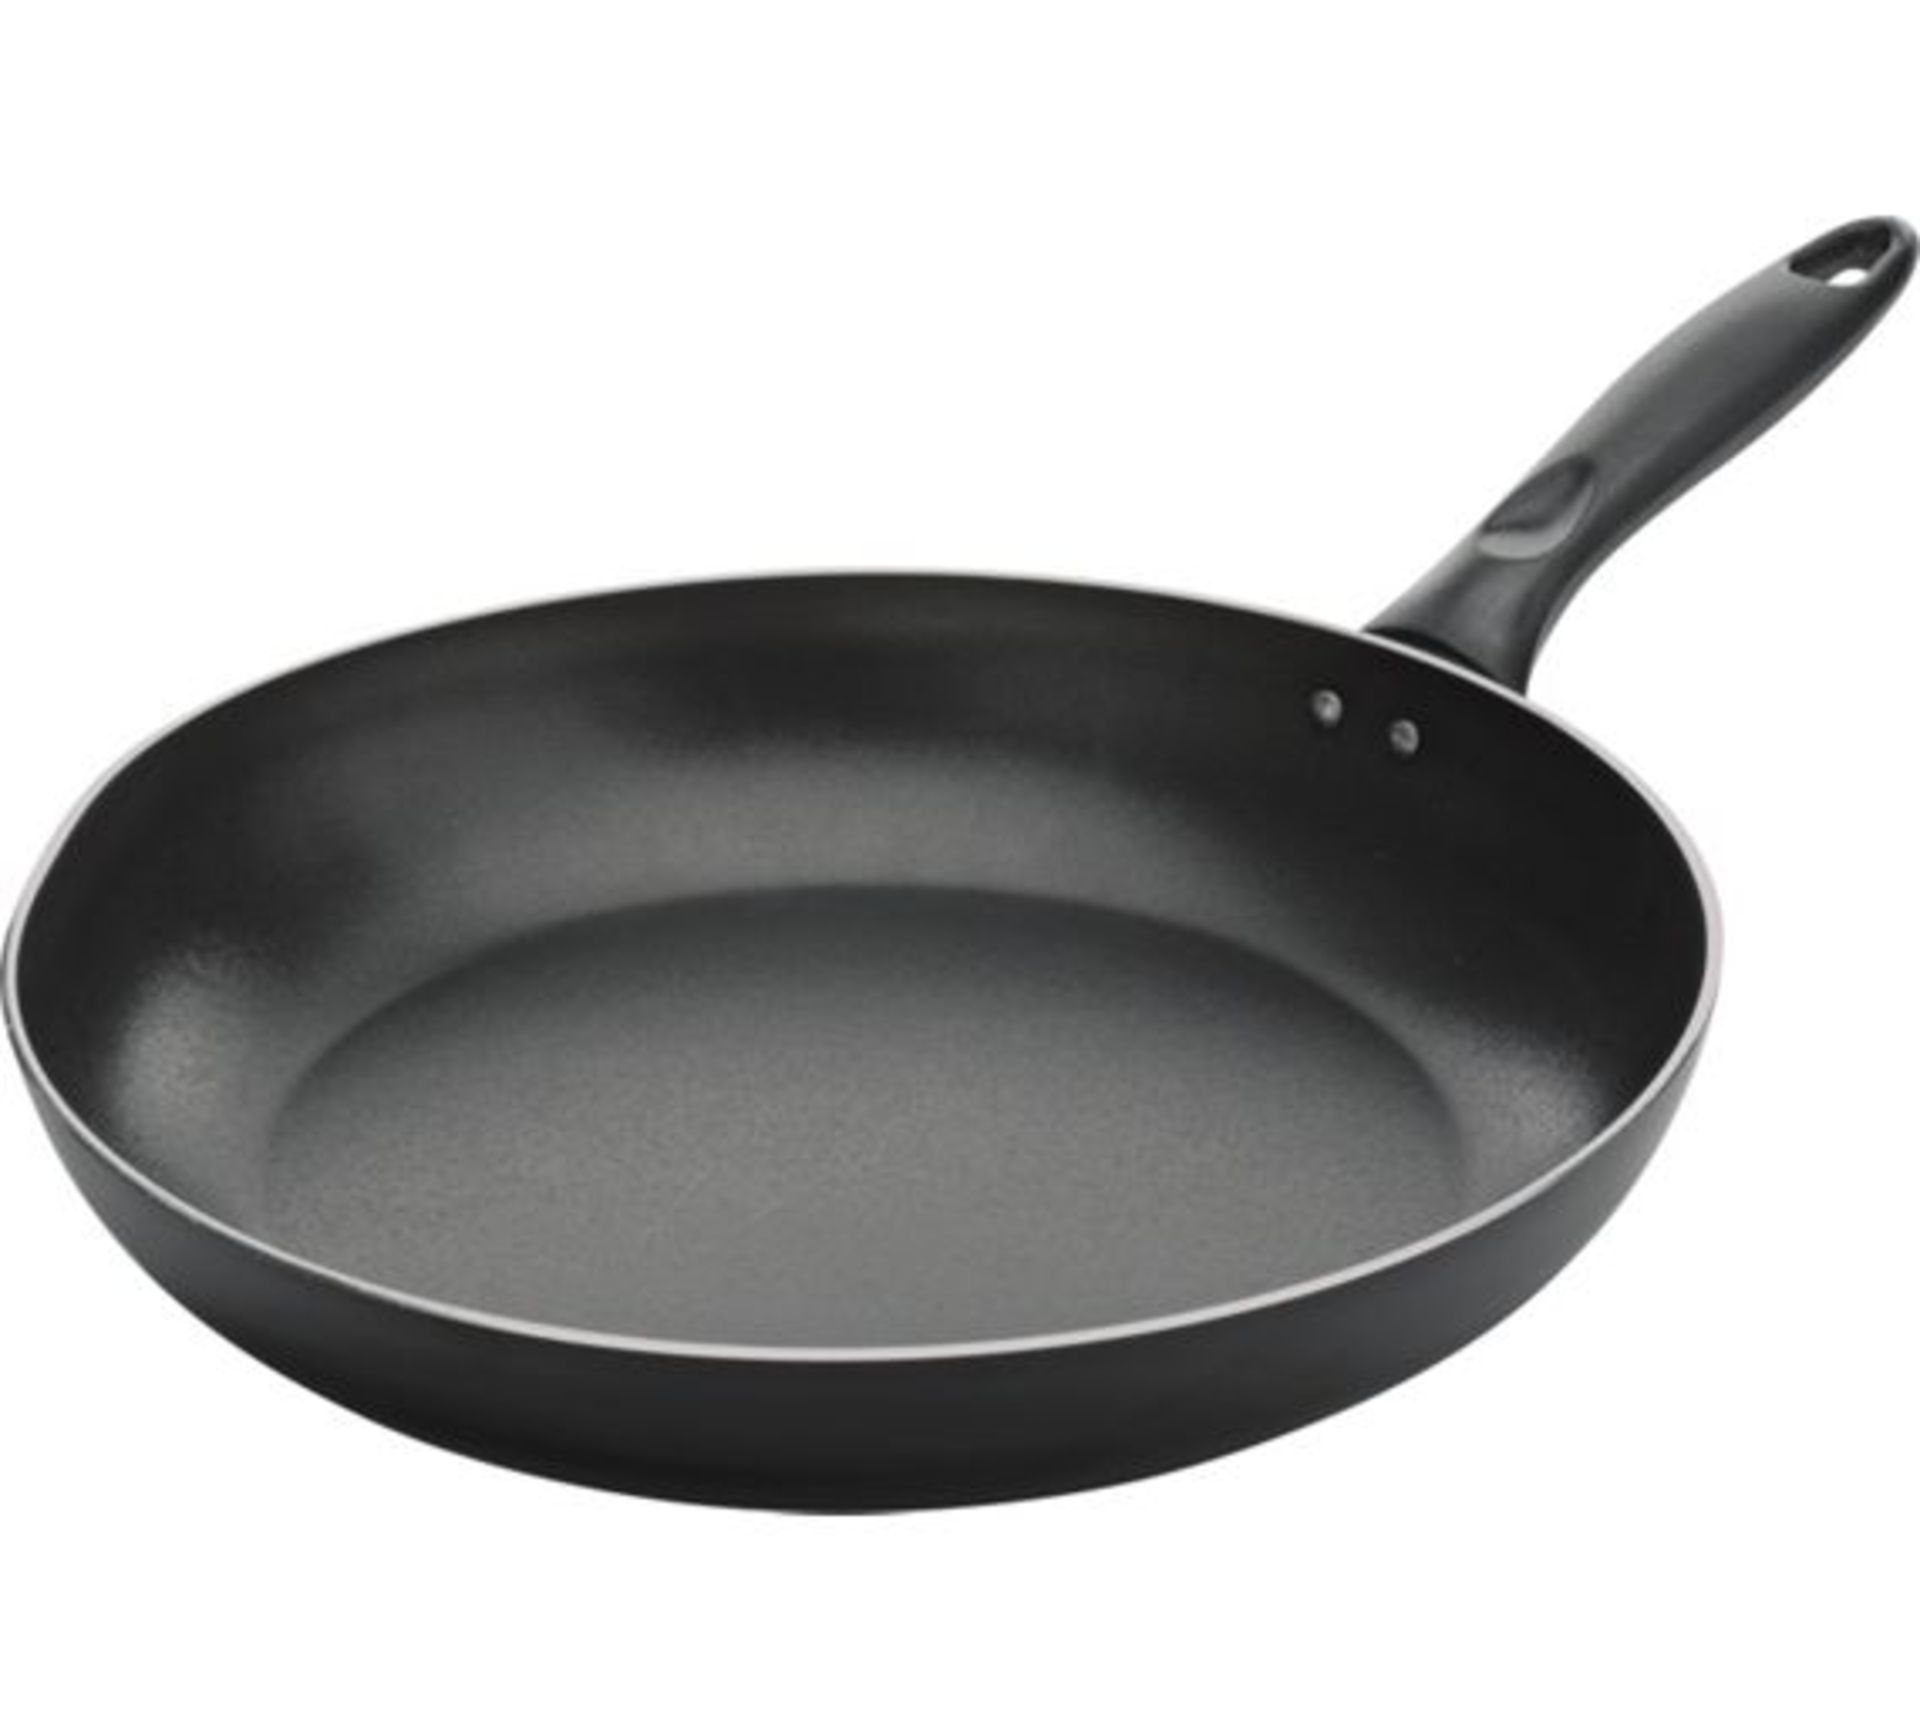 + VAT Brand New 20cm Aluminium Non-Stick Teflon Coated Saute Pan With Stainless Steel and Stay Cool